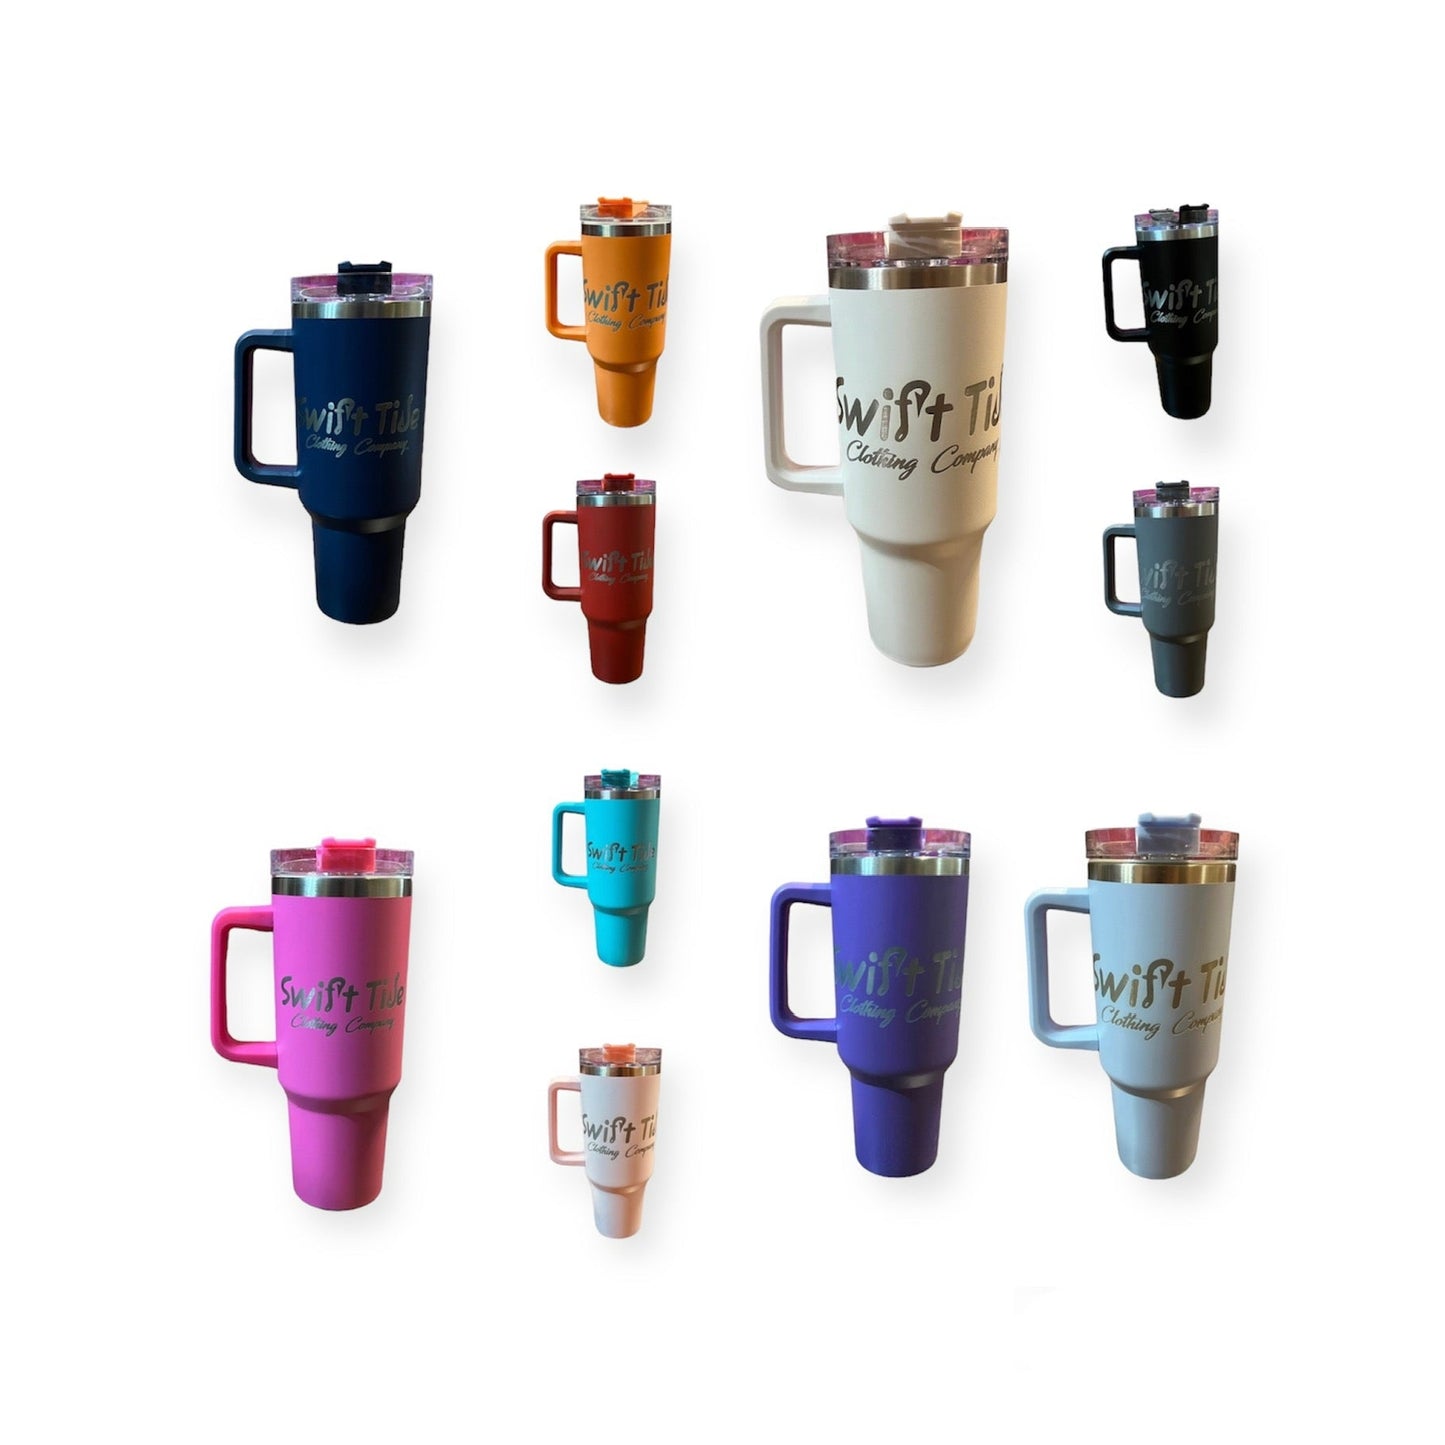 https://swifttideclothingcompany.com/cdn/shop/products/40oz-stainless-steel-tumblers-246672.jpg?v=1691888432&width=1445